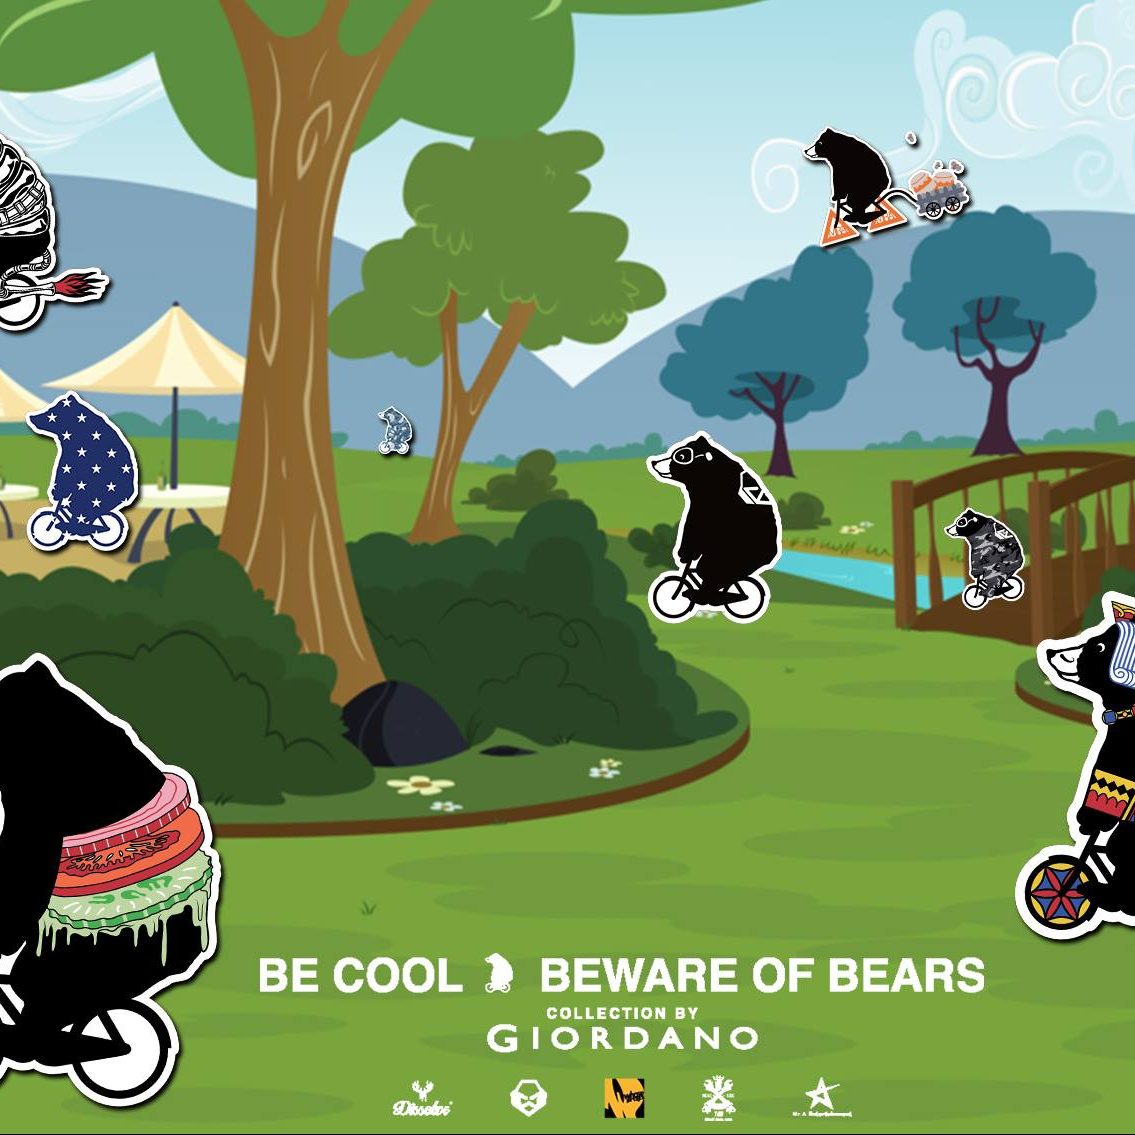 Giordano Singapore Count Number of Bears Facebook Contest ends 4 Oct 2016